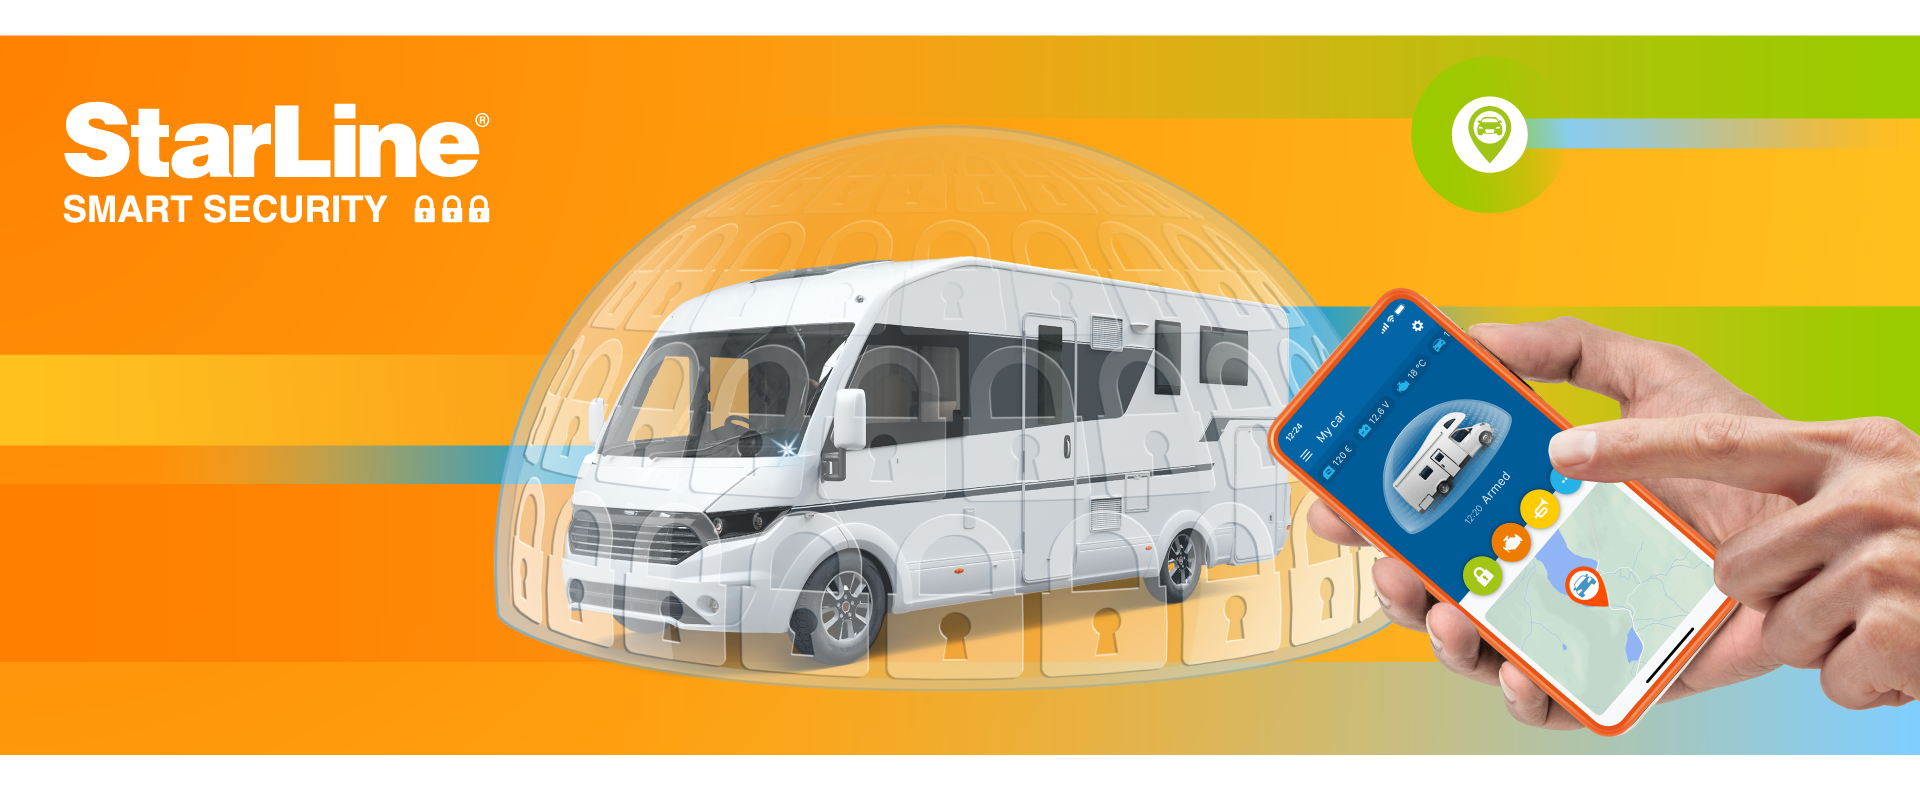 StarLine Smart Security for motorhomes and campers